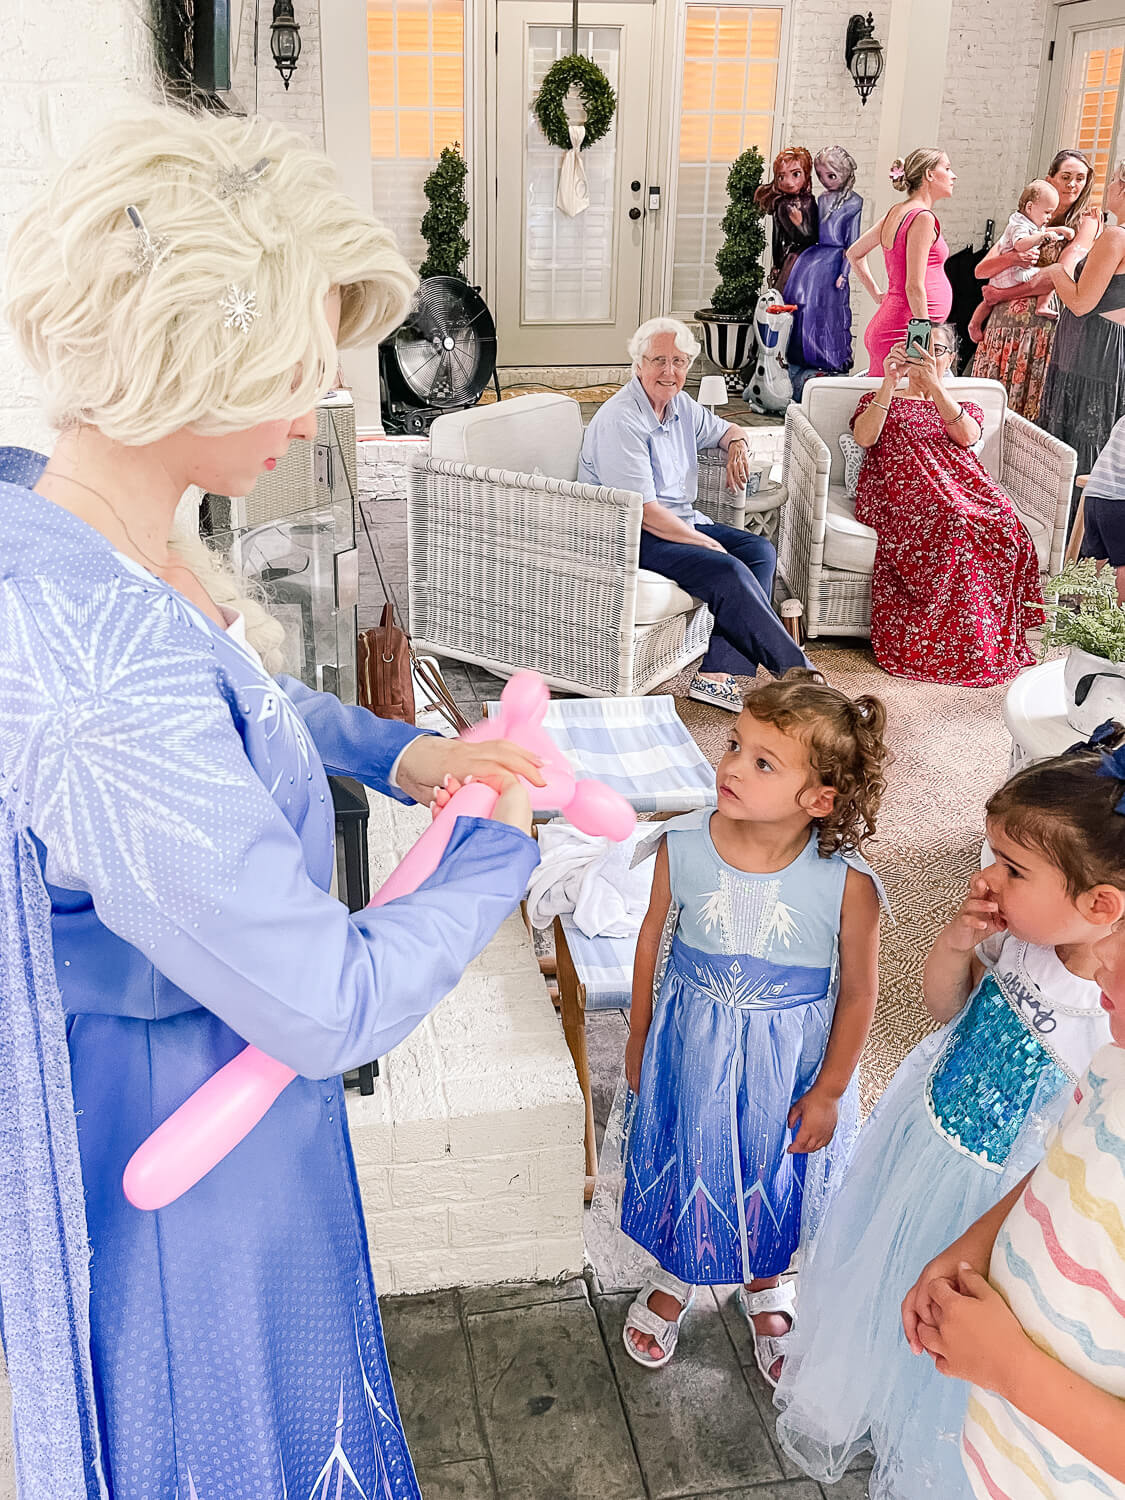 woman dressed like elsa from Frozen making balloon animals for toddler girl